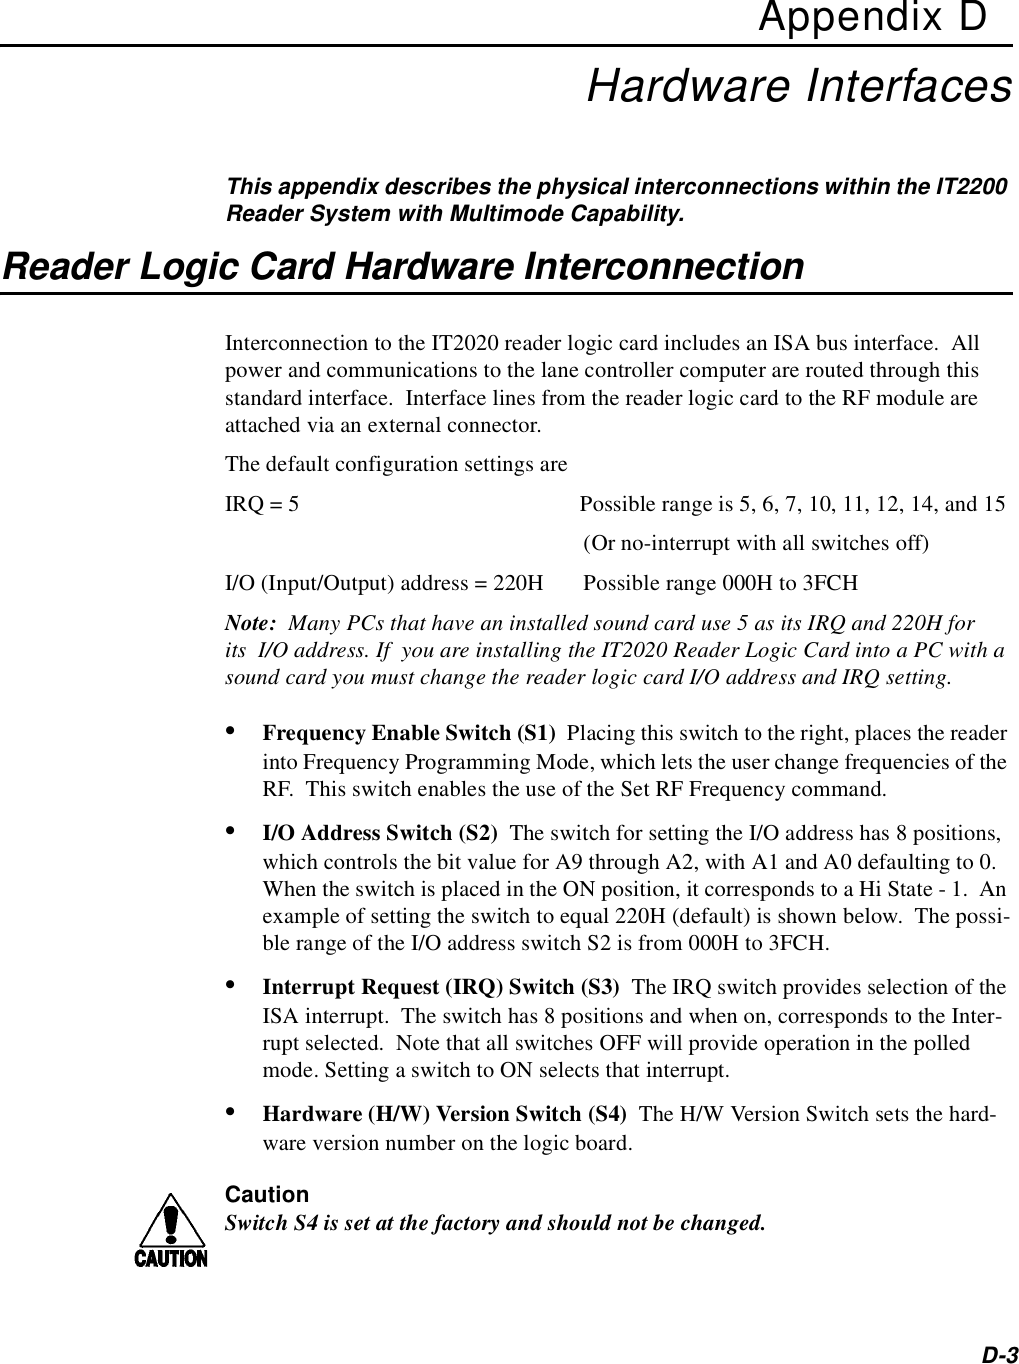 D-3Appendix DHardware InterfacesThis appendix describes the physical interconnections within the IT2200 Reader System with Multimode Capability.Reader Logic Card Hardware InterconnectionInterconnection to the IT2020 reader logic card includes an ISA bus interface.  All power and communications to the lane controller computer are routed through this standard interface.  Interface lines from the reader logic card to the RF module are attached via an external connector.The default configuration settings areIRQ = 5 Possible range is 5, 6, 7, 10, 11, 12, 14, and 15 (Or no-interrupt with all switches off)I/O (Input/Output) address = 220H Possible range 000H to 3FCHNote:  Many PCs that have an installed sound card use 5 as its IRQ and 220H for its I/O address. If  you are installing the IT2020 Reader Logic Card into a PC with a sound card you must change the reader logic card I/O address and IRQ setting.•Frequency Enable Switch (S1)  Placing this switch to the right, places the reader into Frequency Programming Mode, which lets the user change frequencies of the RF.  This switch enables the use of the Set RF Frequency command.•I/O Address Switch (S2)  The switch for setting the I/O address has 8 positions, which controls the bit value for A9 through A2, with A1 and A0 defaulting to 0.  When the switch is placed in the ON position, it corresponds to a Hi State - 1.  An example of setting the switch to equal 220H (default) is shown below.  The possi-ble range of the I/O address switch S2 is from 000H to 3FCH.•Interrupt Request (IRQ) Switch (S3)  The IRQ switch provides selection of the ISA interrupt.  The switch has 8 positions and when on, corresponds to the Inter-rupt selected.  Note that all switches OFF will provide operation in the polled mode. Setting a switch to ON selects that interrupt.•Hardware (H/W) Version Switch (S4)  The H/W Version Switch sets the hard-ware version number on the logic board. CautionSwitch S4 is set at the factory and should not be changed.